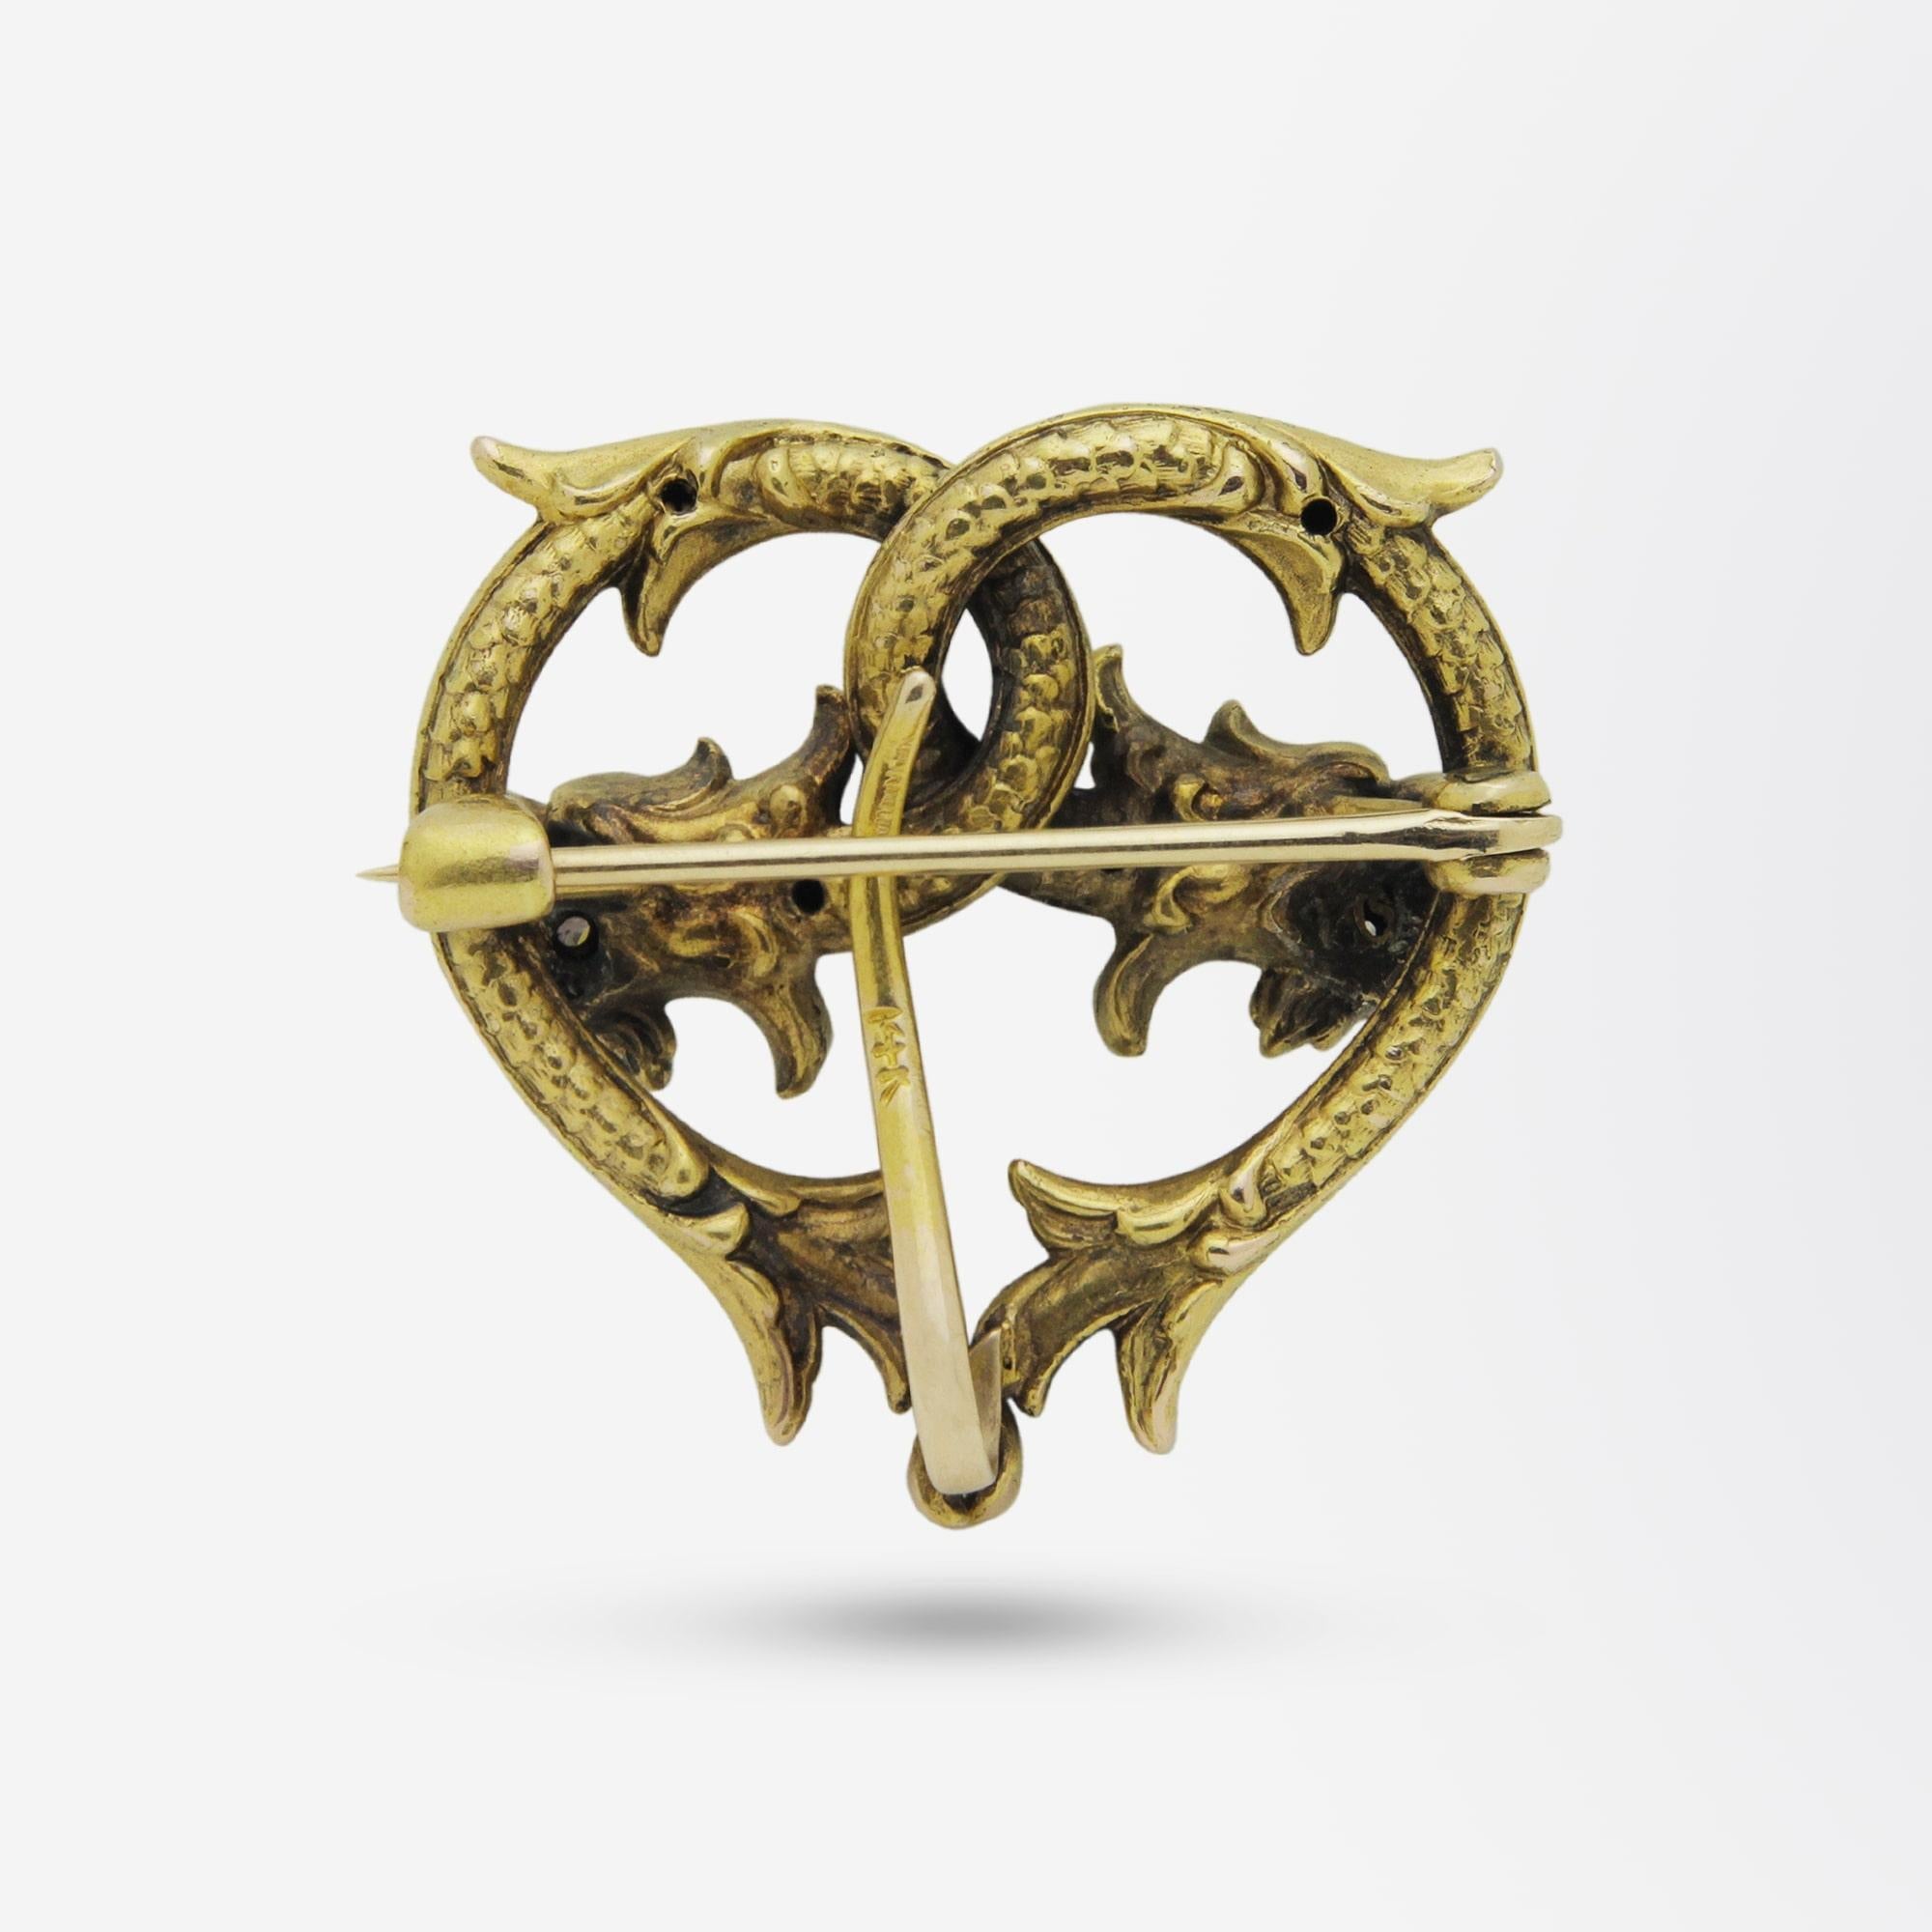 A Victorian brooch pin with hook to the rear to enable a fob watch to hang. The brooch is crafted from 14 karat yellow gold, indicating it is likely American, and is set with peridots and diamonds. The form of the pin is that of two intertwined